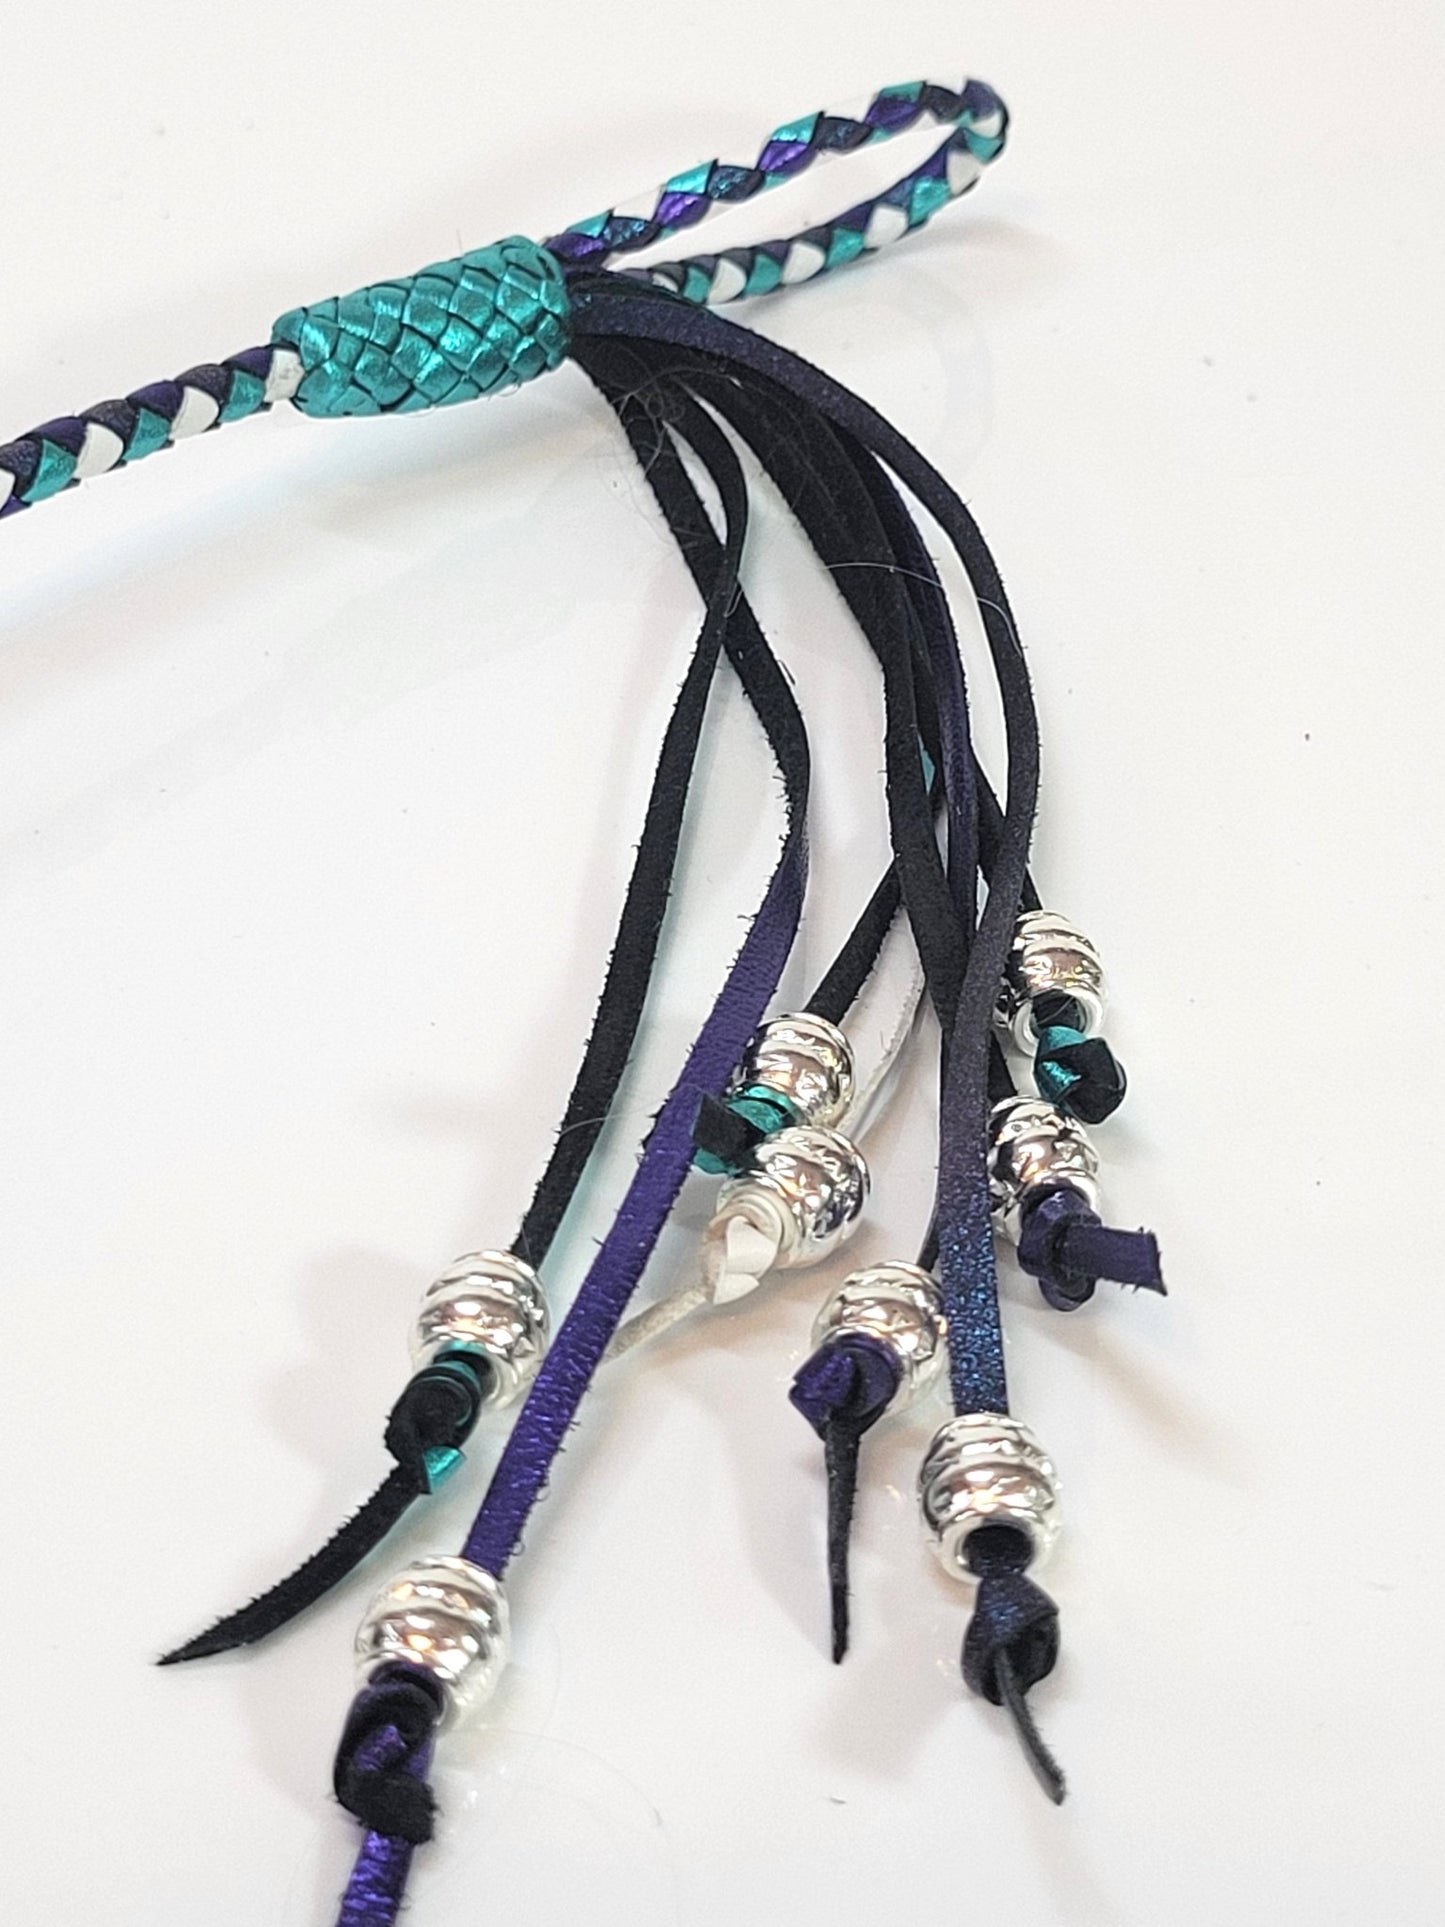 22.5" Braided Loop End Show Lead with Matching Grooming Loop (2pc set) - Champion Show Leads